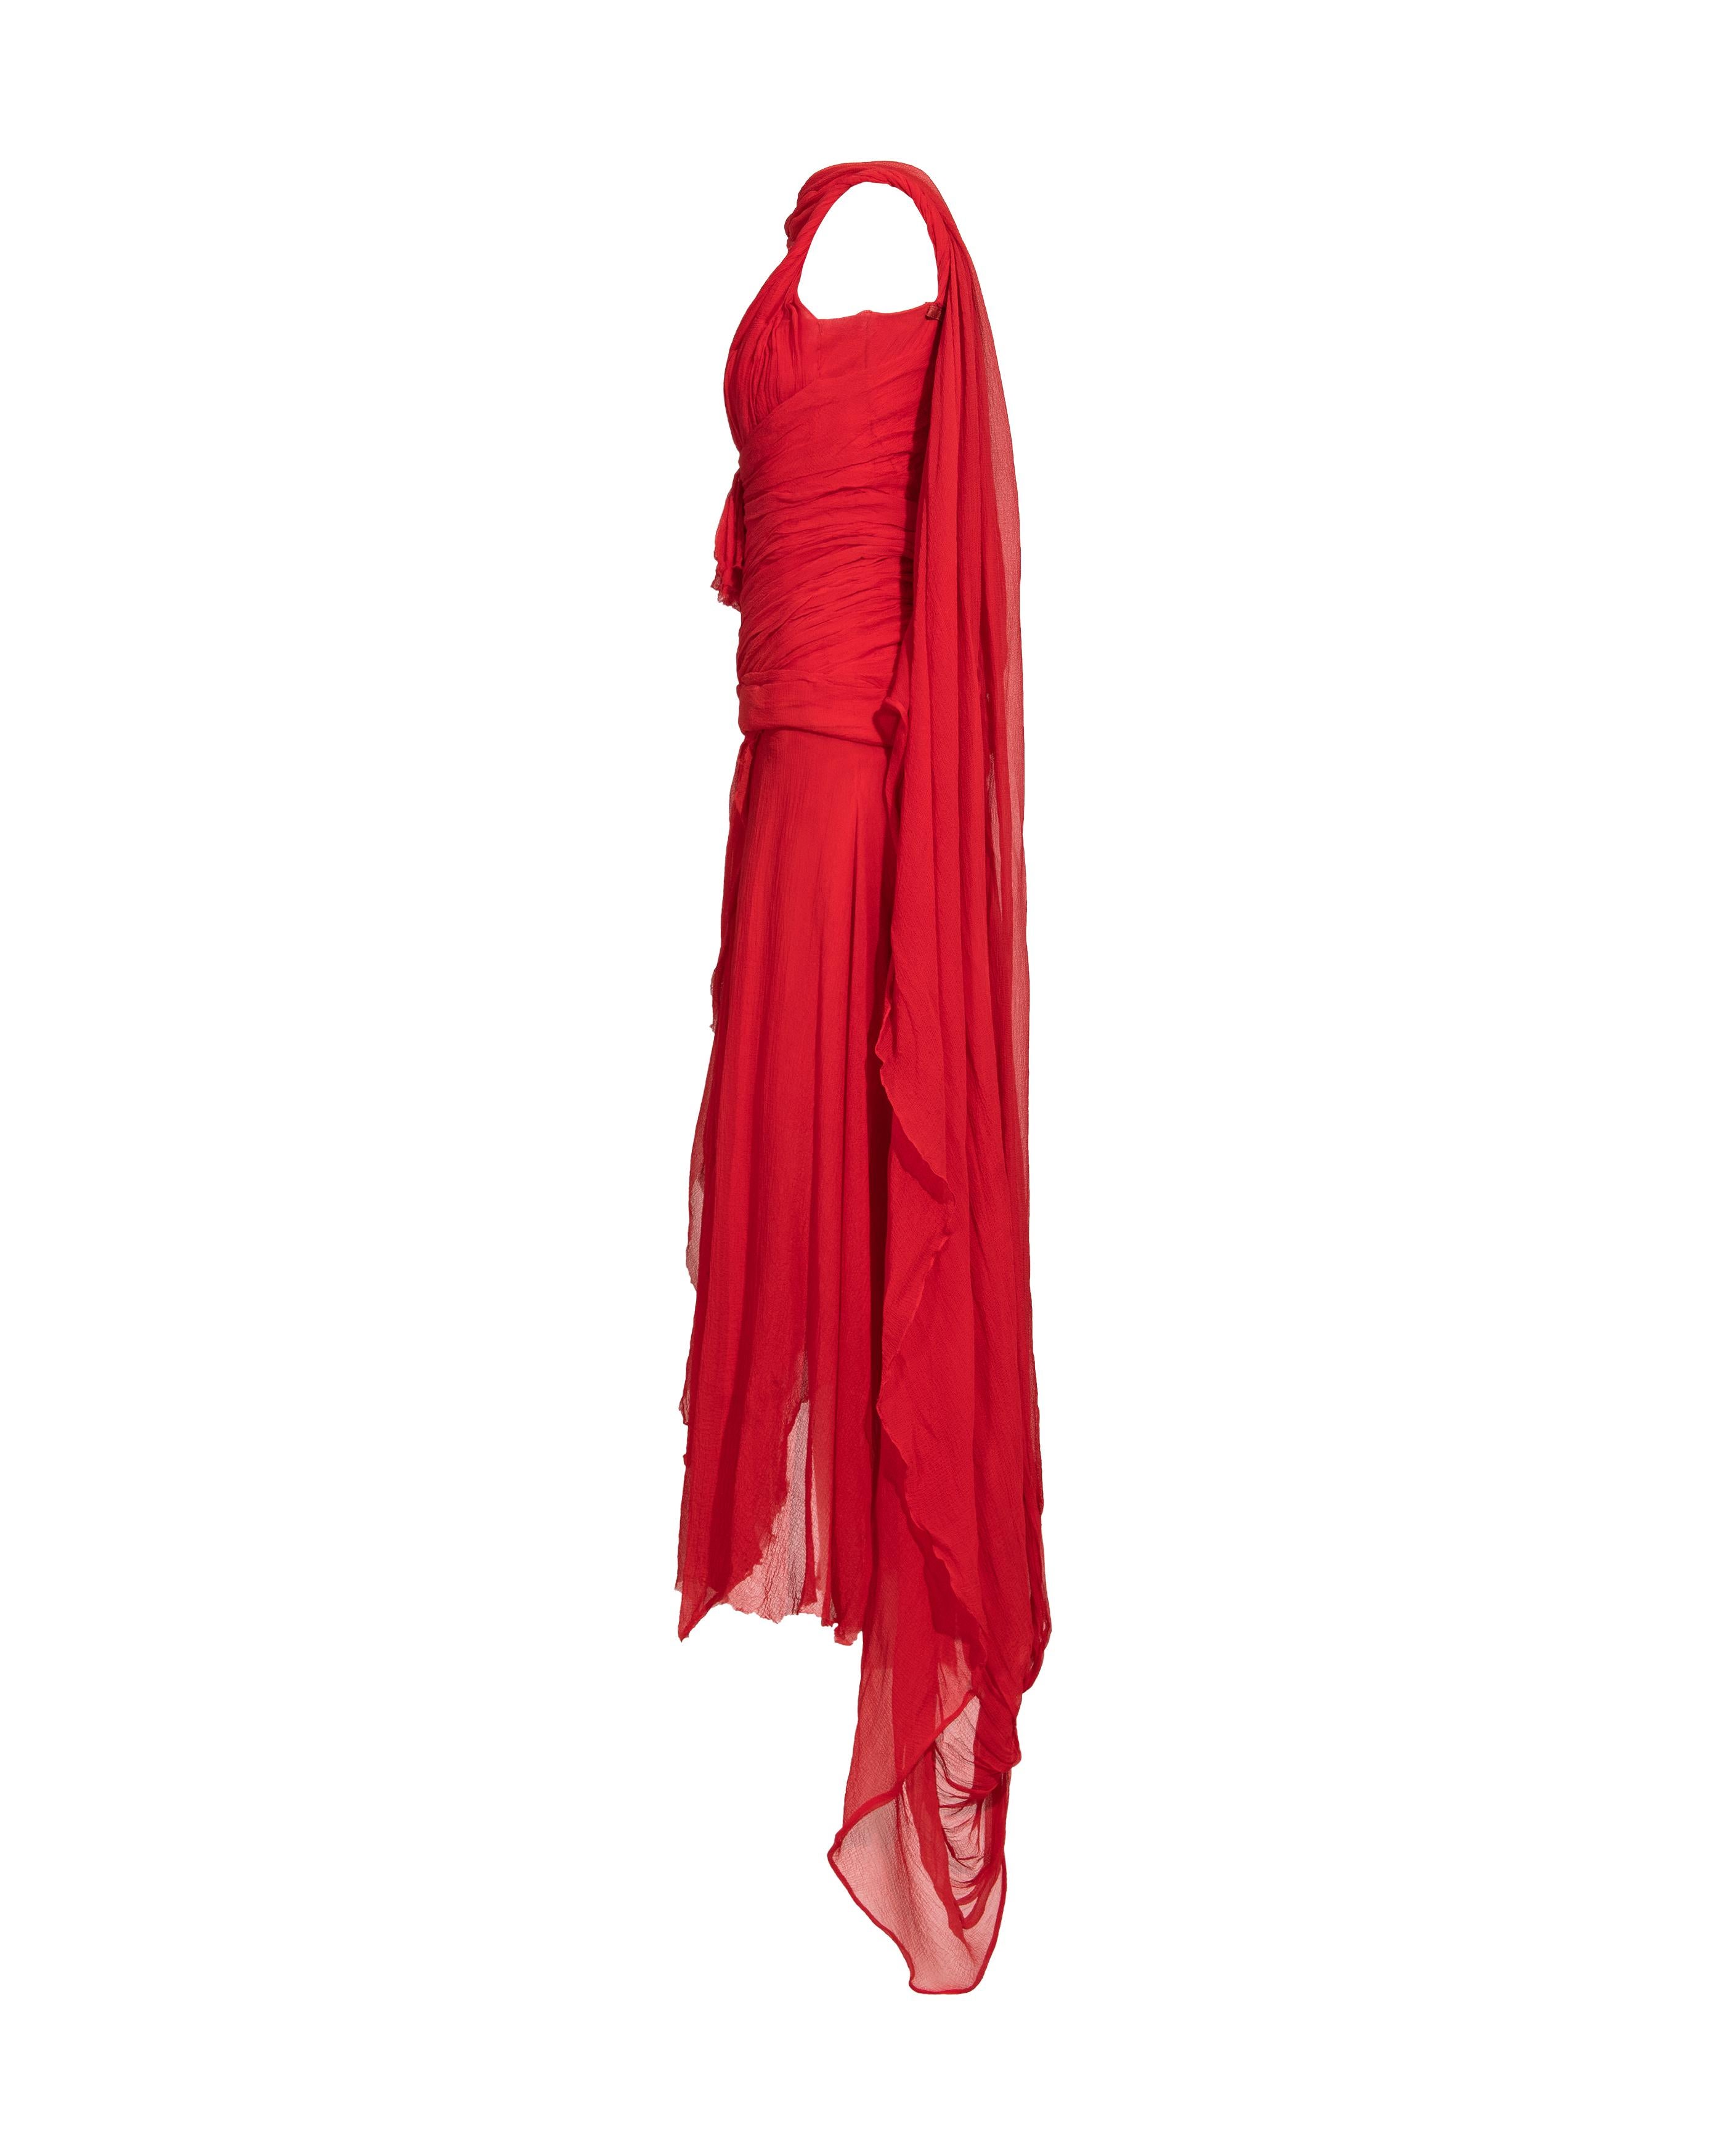 S/S 2003 Alexander McQueen  'Irere' Collection Red Silk Chiffon Gown with Sash 1